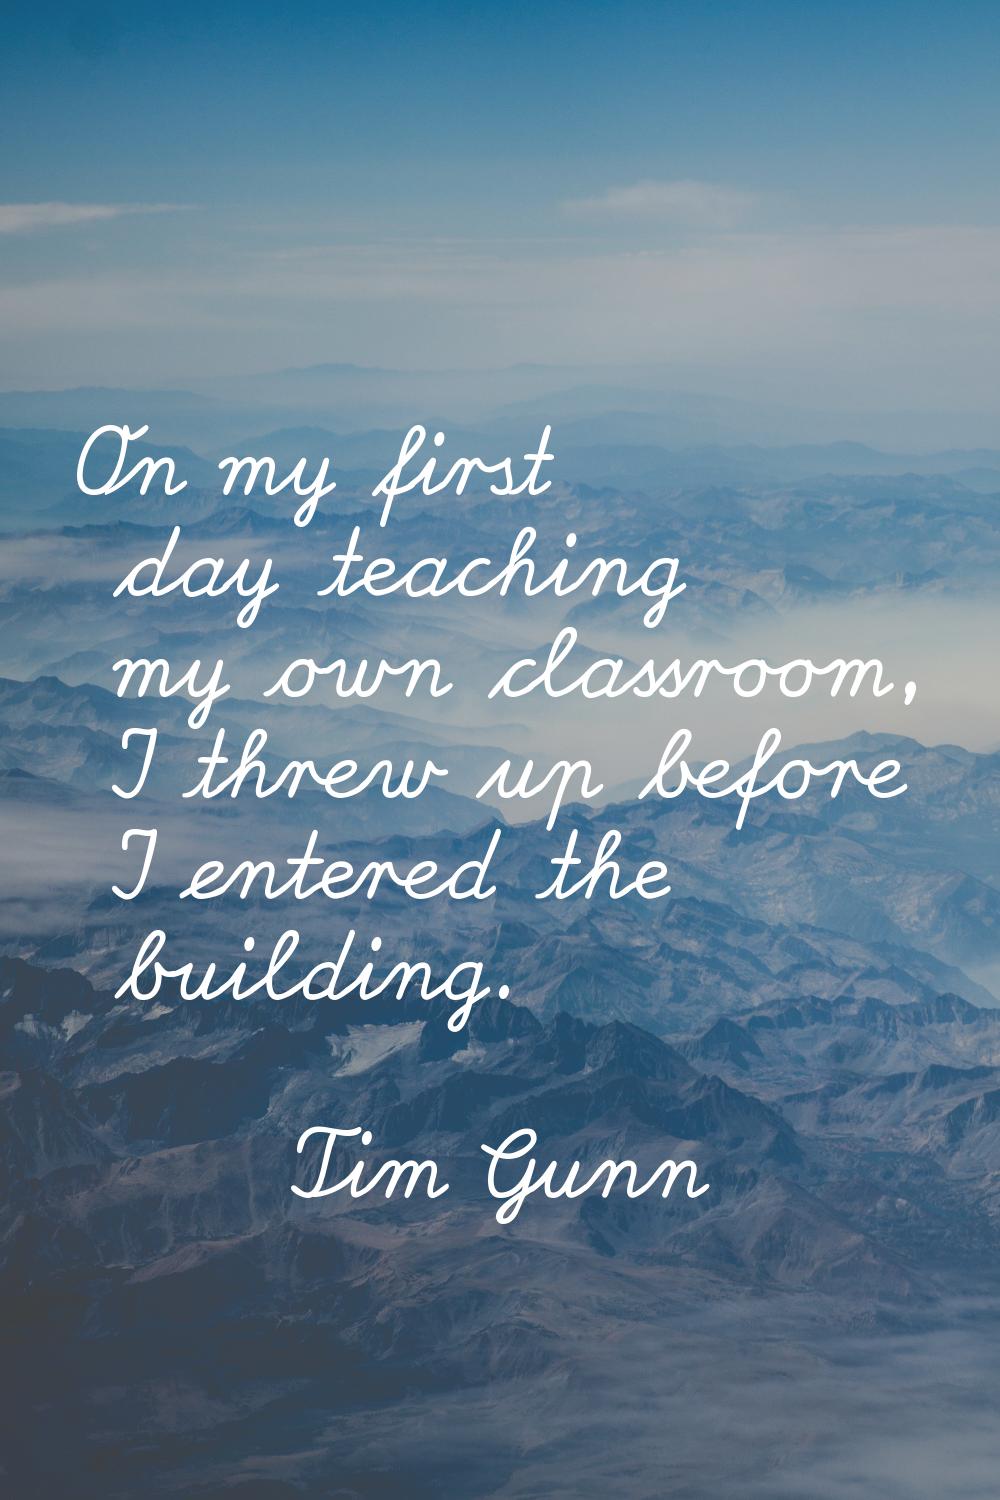 On my first day teaching my own classroom, I threw up before I entered the building.